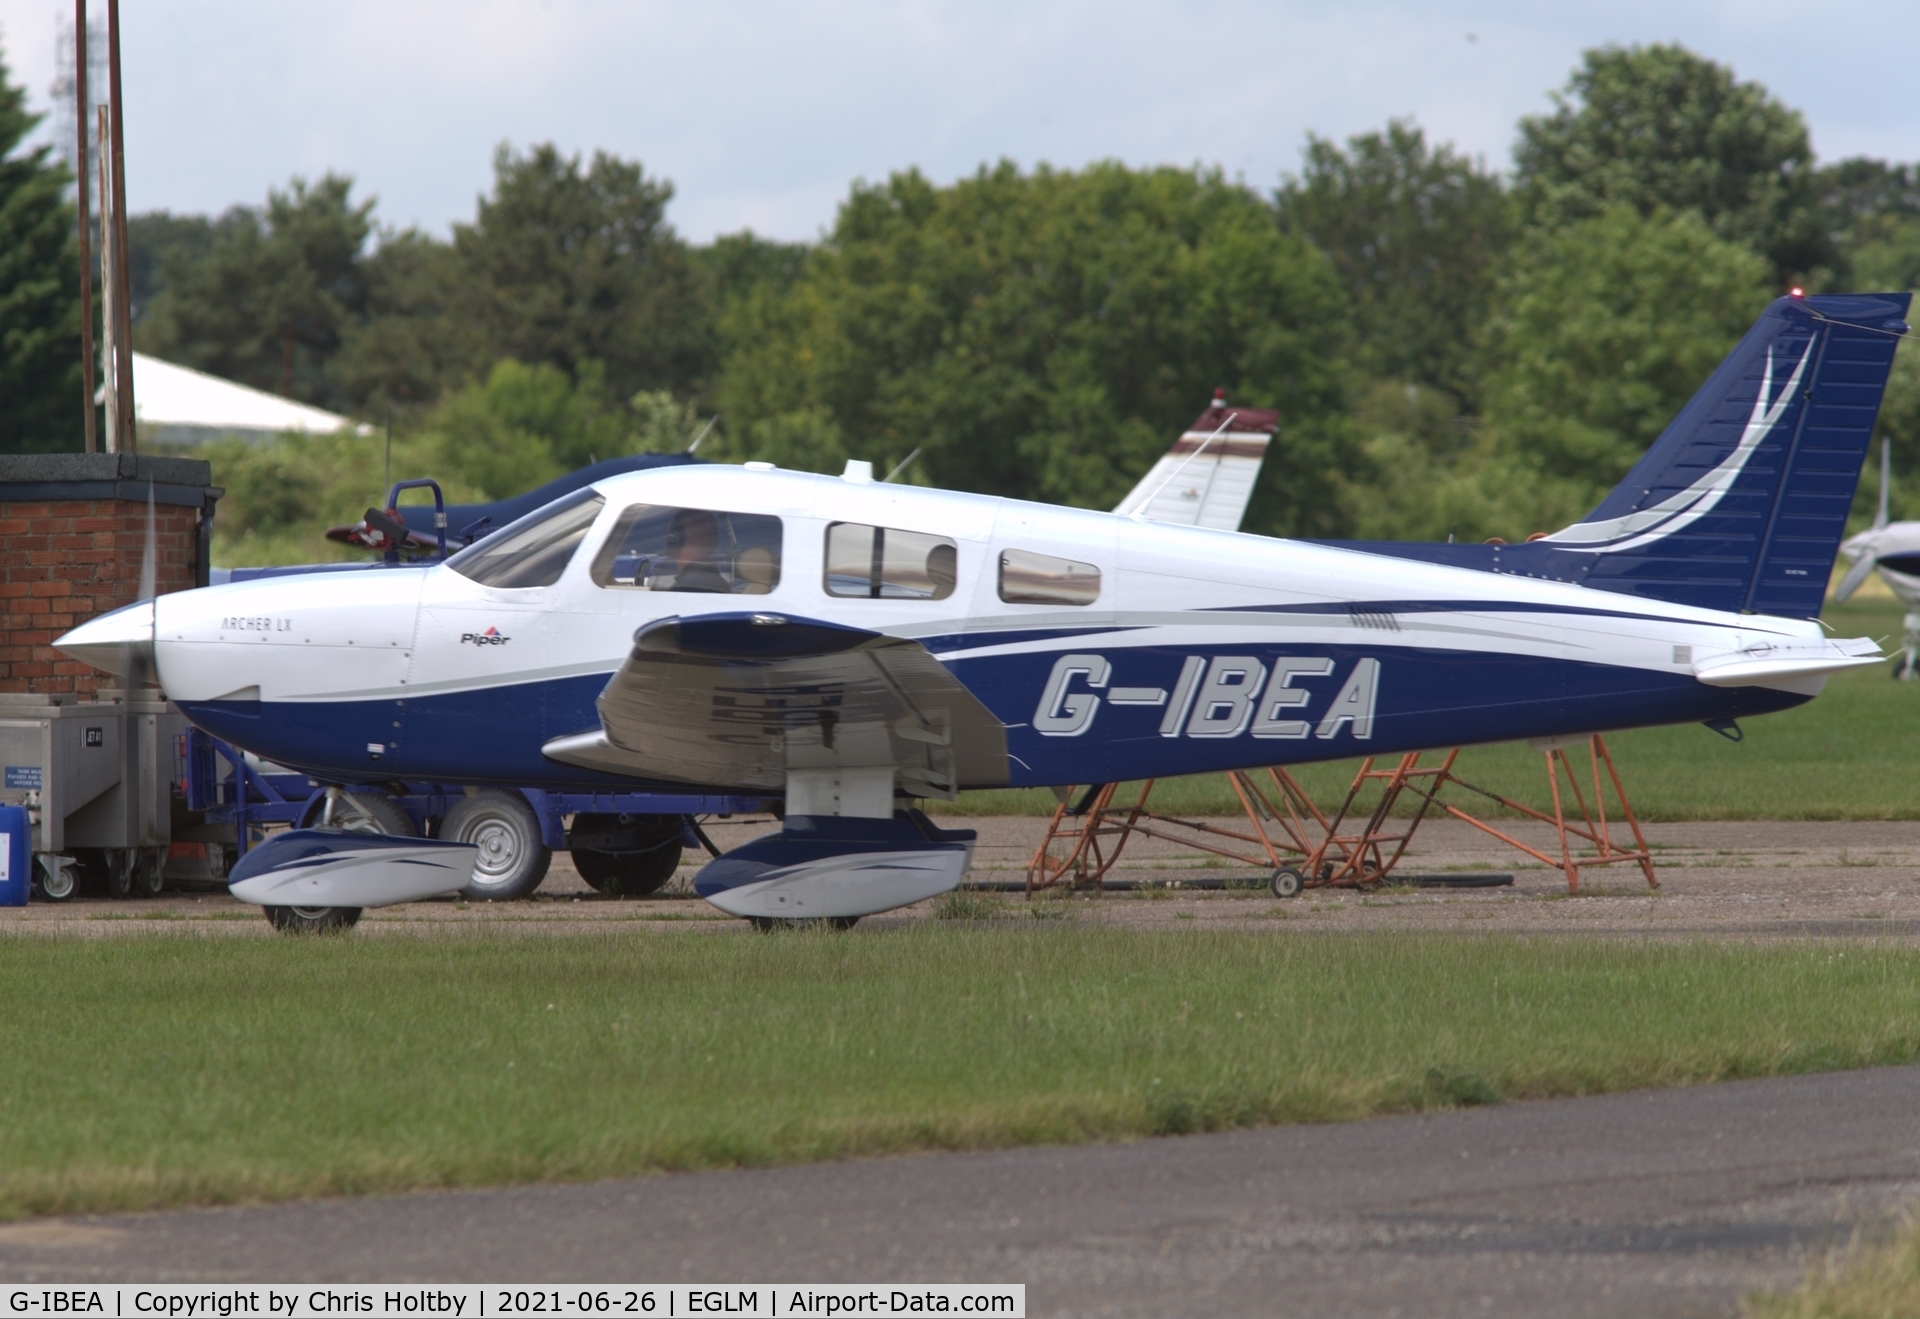 G-IBEA, 2018 Piper PA-28-181 Cherokee Archer III C/N 2881027, Smart 2018 Archer LX queueing for fuel at White Waltham, Berkshire